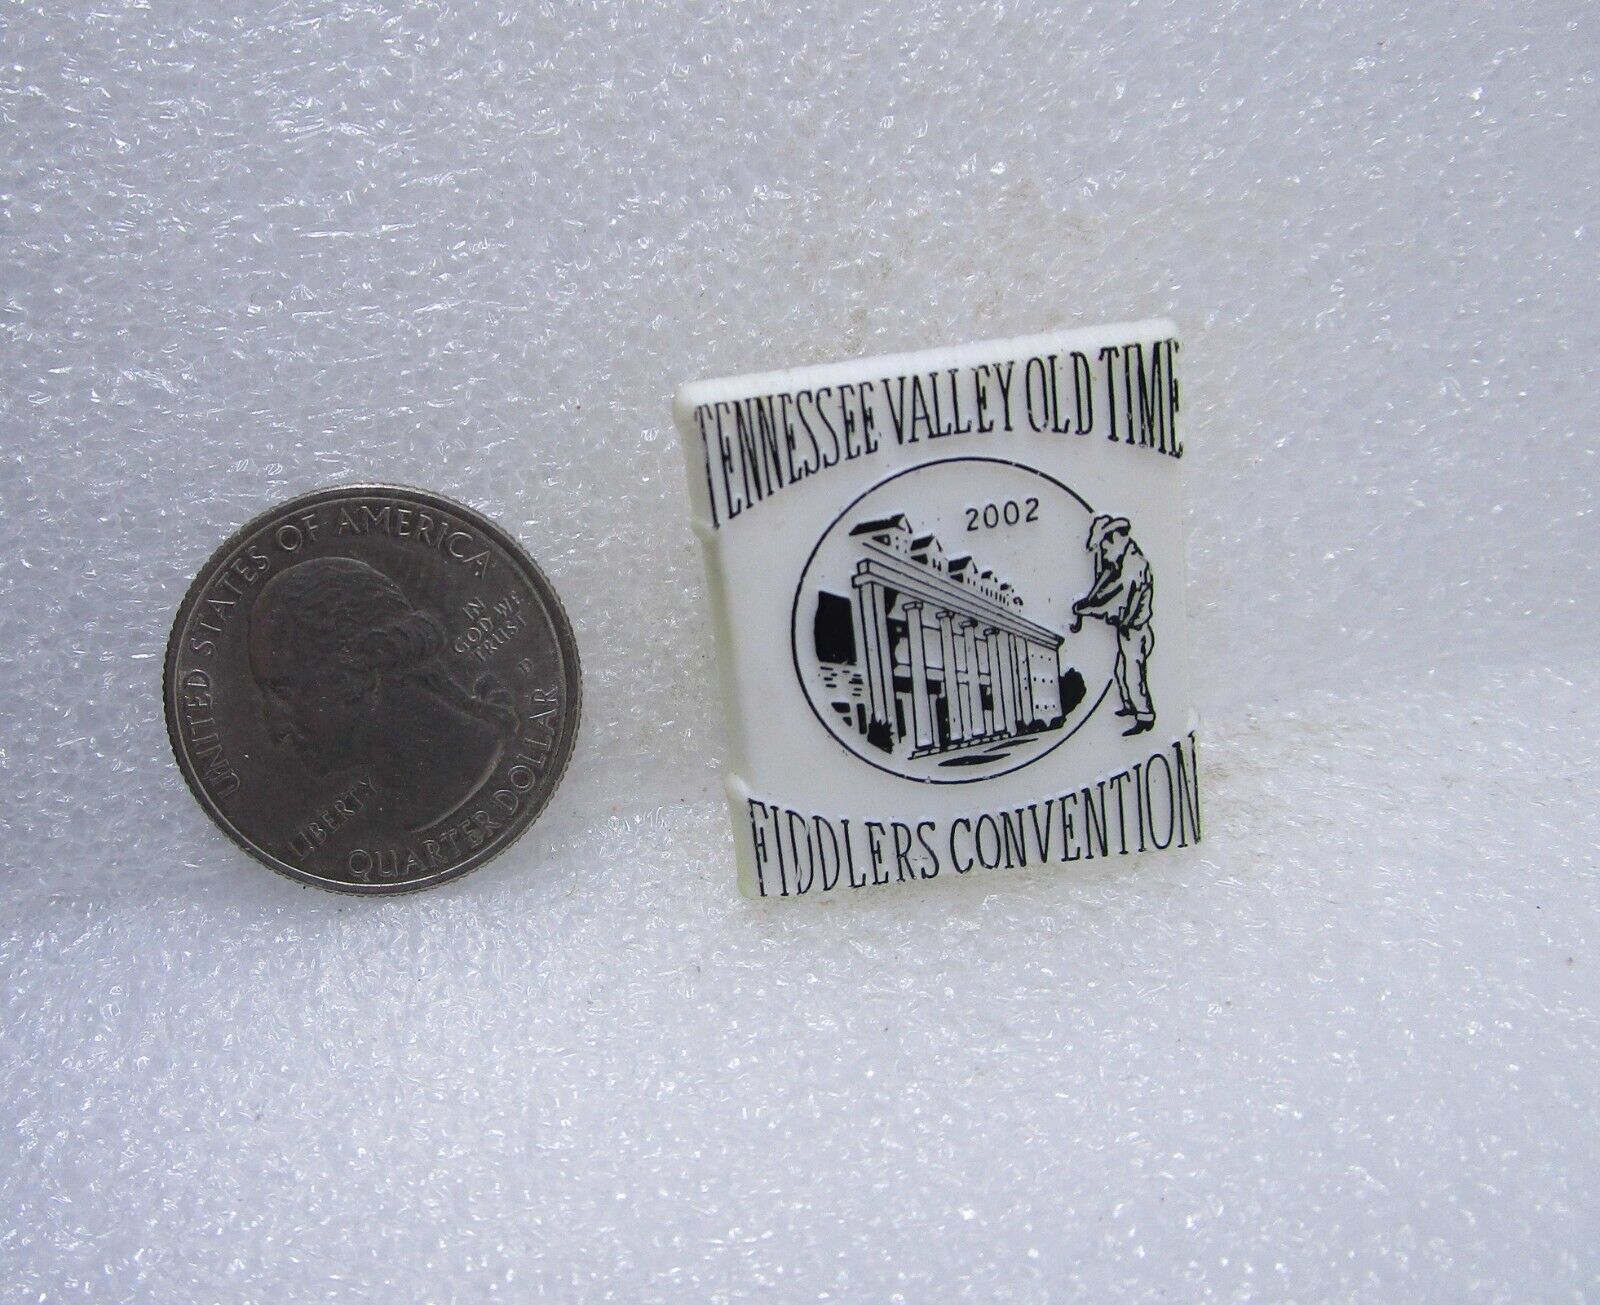 2002 Tennessee Valley Old Time Fiddlers Convention Plastic Pin